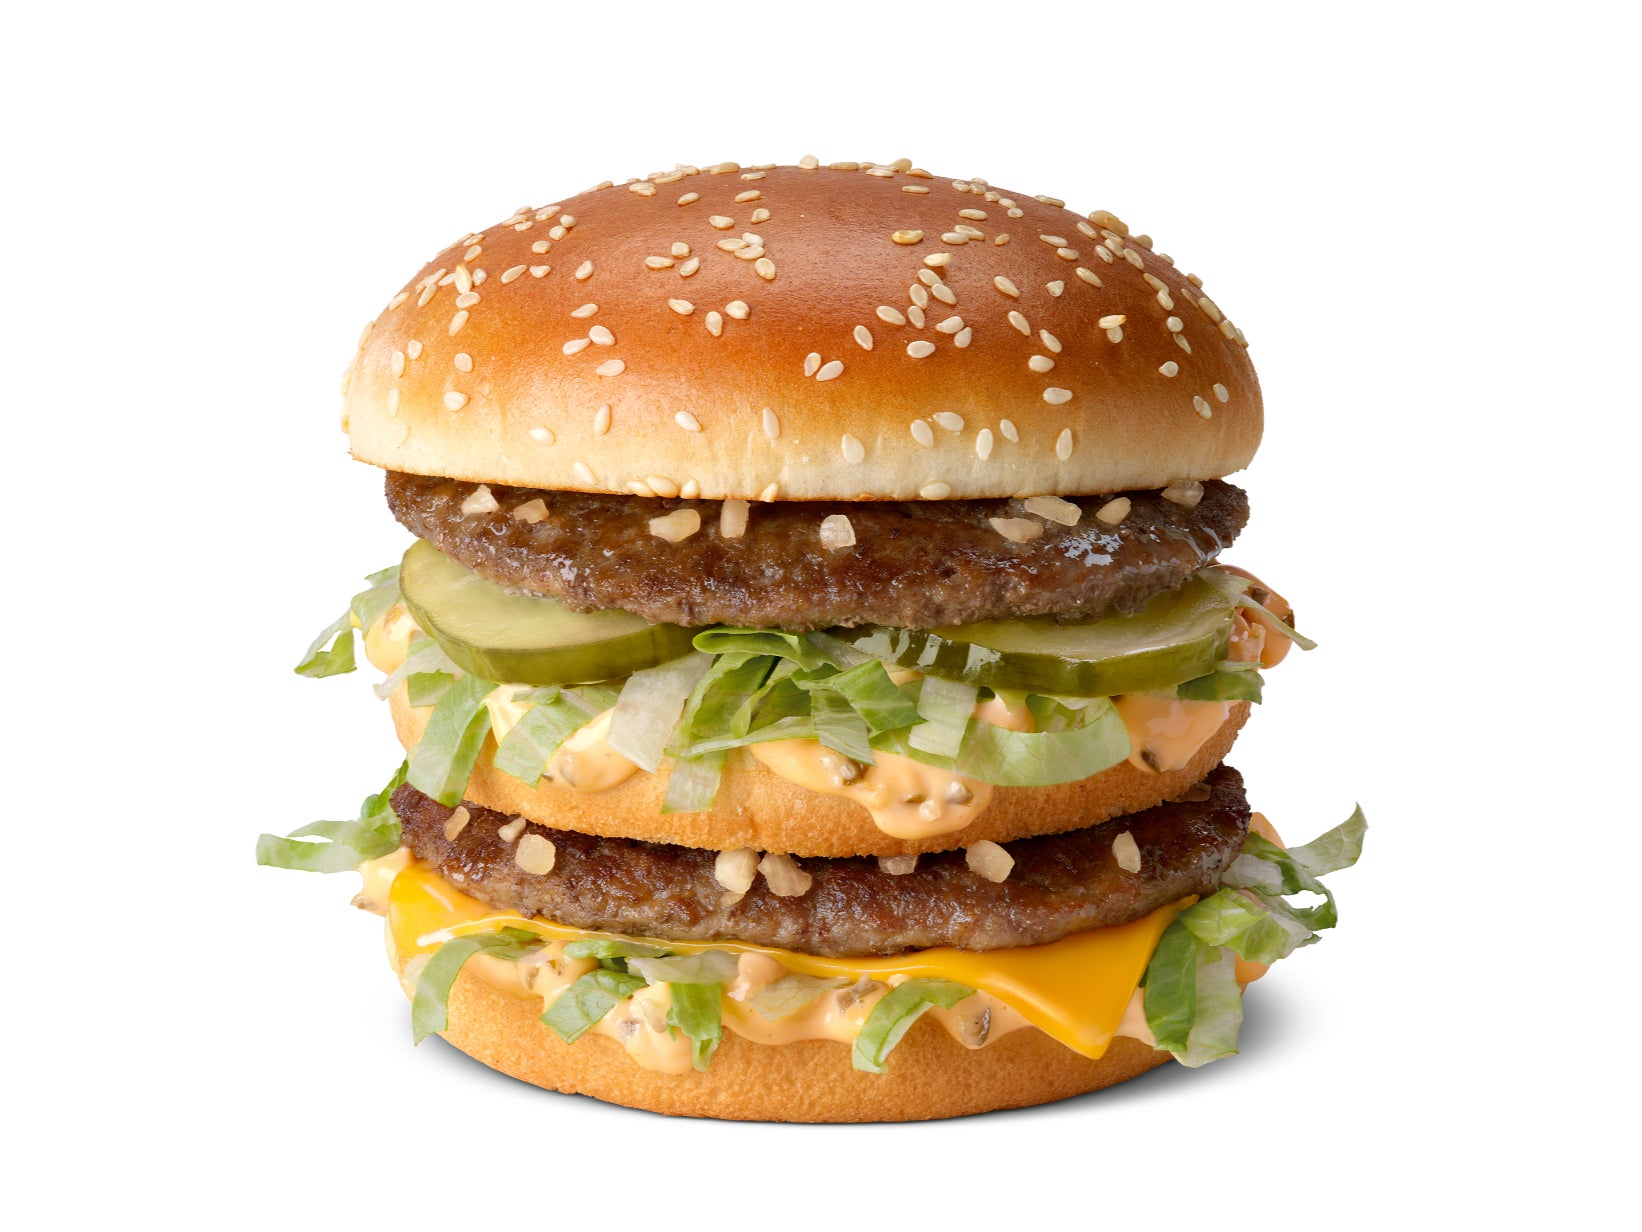 A McDonald’s Big Mac sandwich now sits at an average price of $5.29, up from $3.99 in 2019